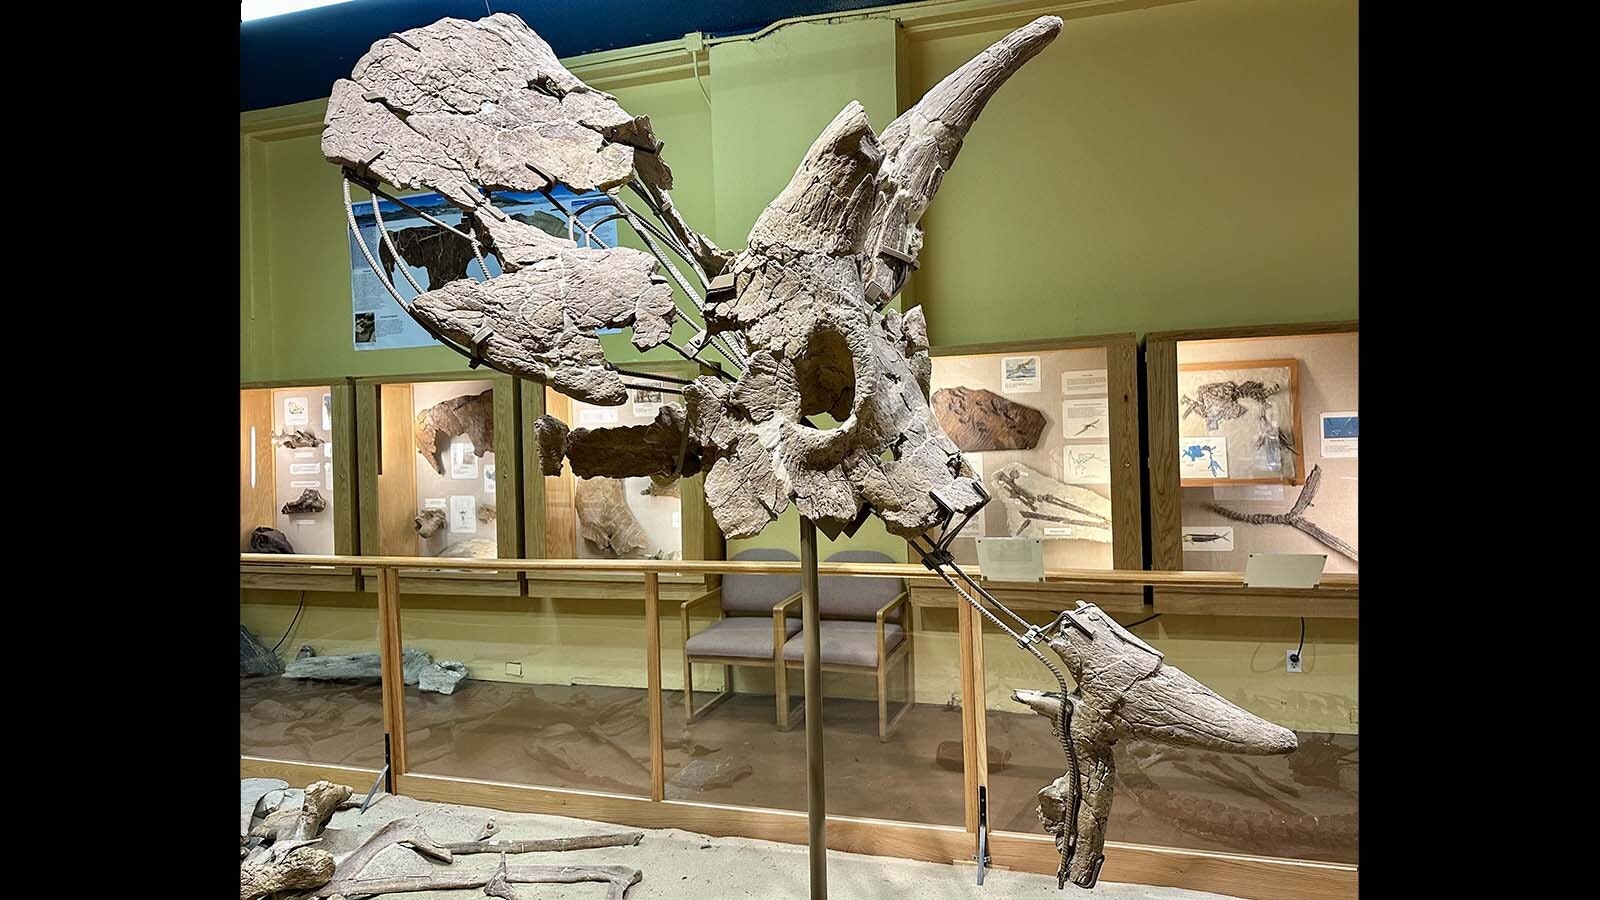 Lady Stephanie," a Triceratops skull on display at the Paleon Museum in Glenrock. This skull was one of the first fossils found in Triceratops Gulch, which is how the location and the project got its name. Triceratops is the most common dinosaur found in the Lance Formation.